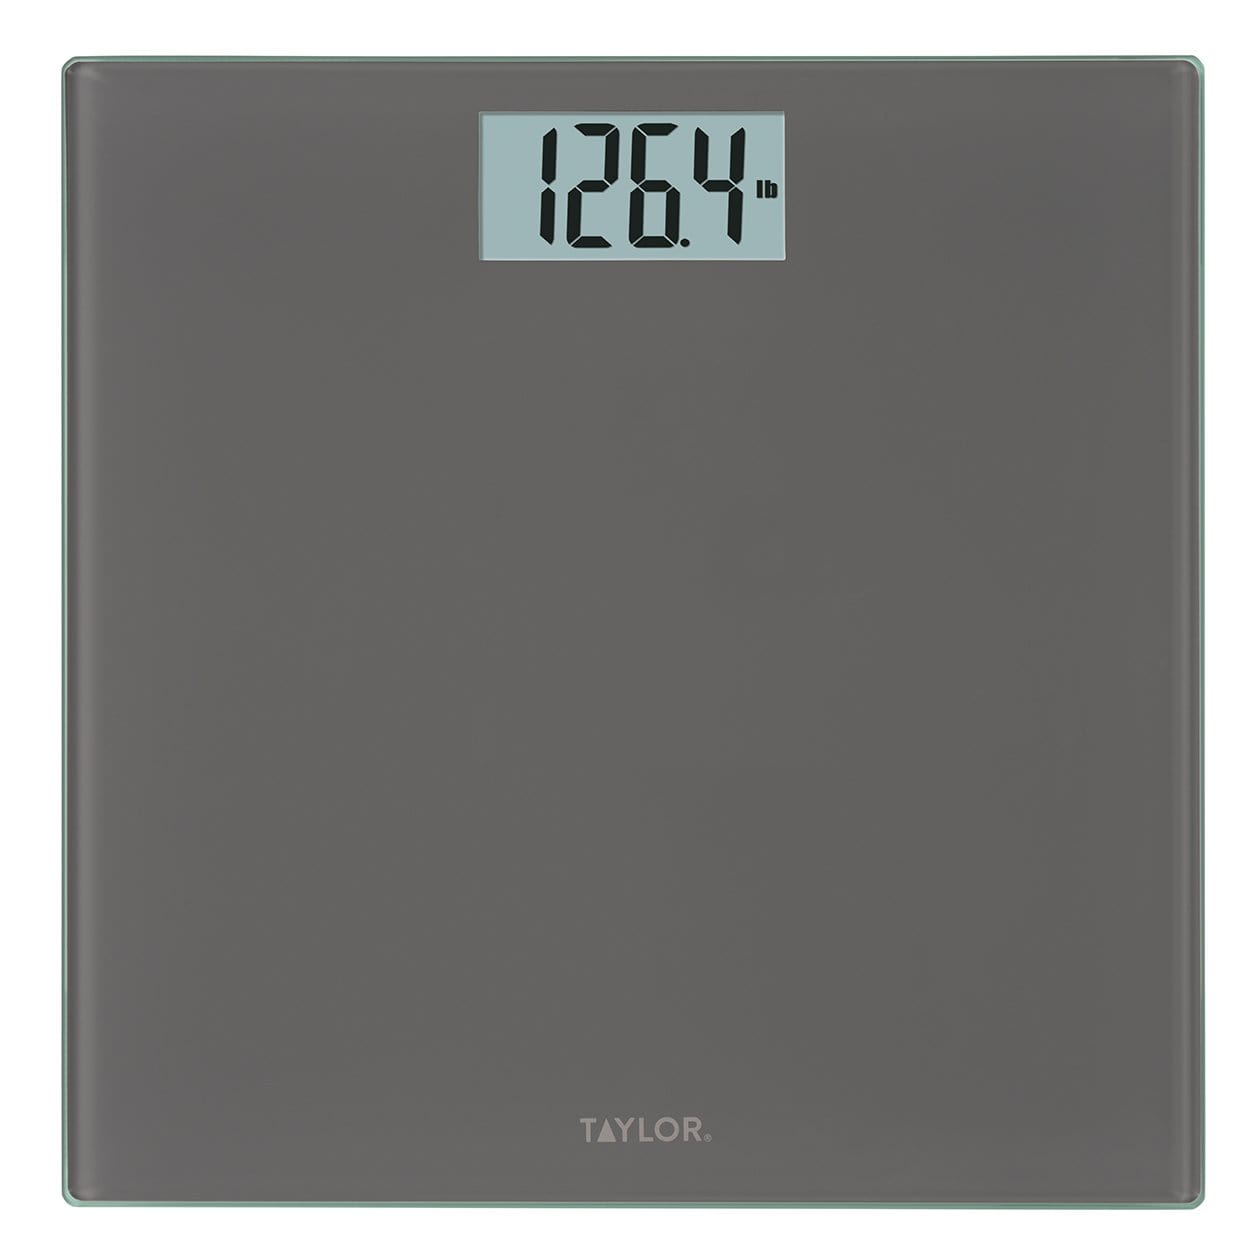 Taylor Digital Scales for Body Weight, Highly Accurate 400 LB Capacity,  Durable Glass Platform 11.8 x 11.8 Inches, Easy to Read 3.2 Inches x 1.5